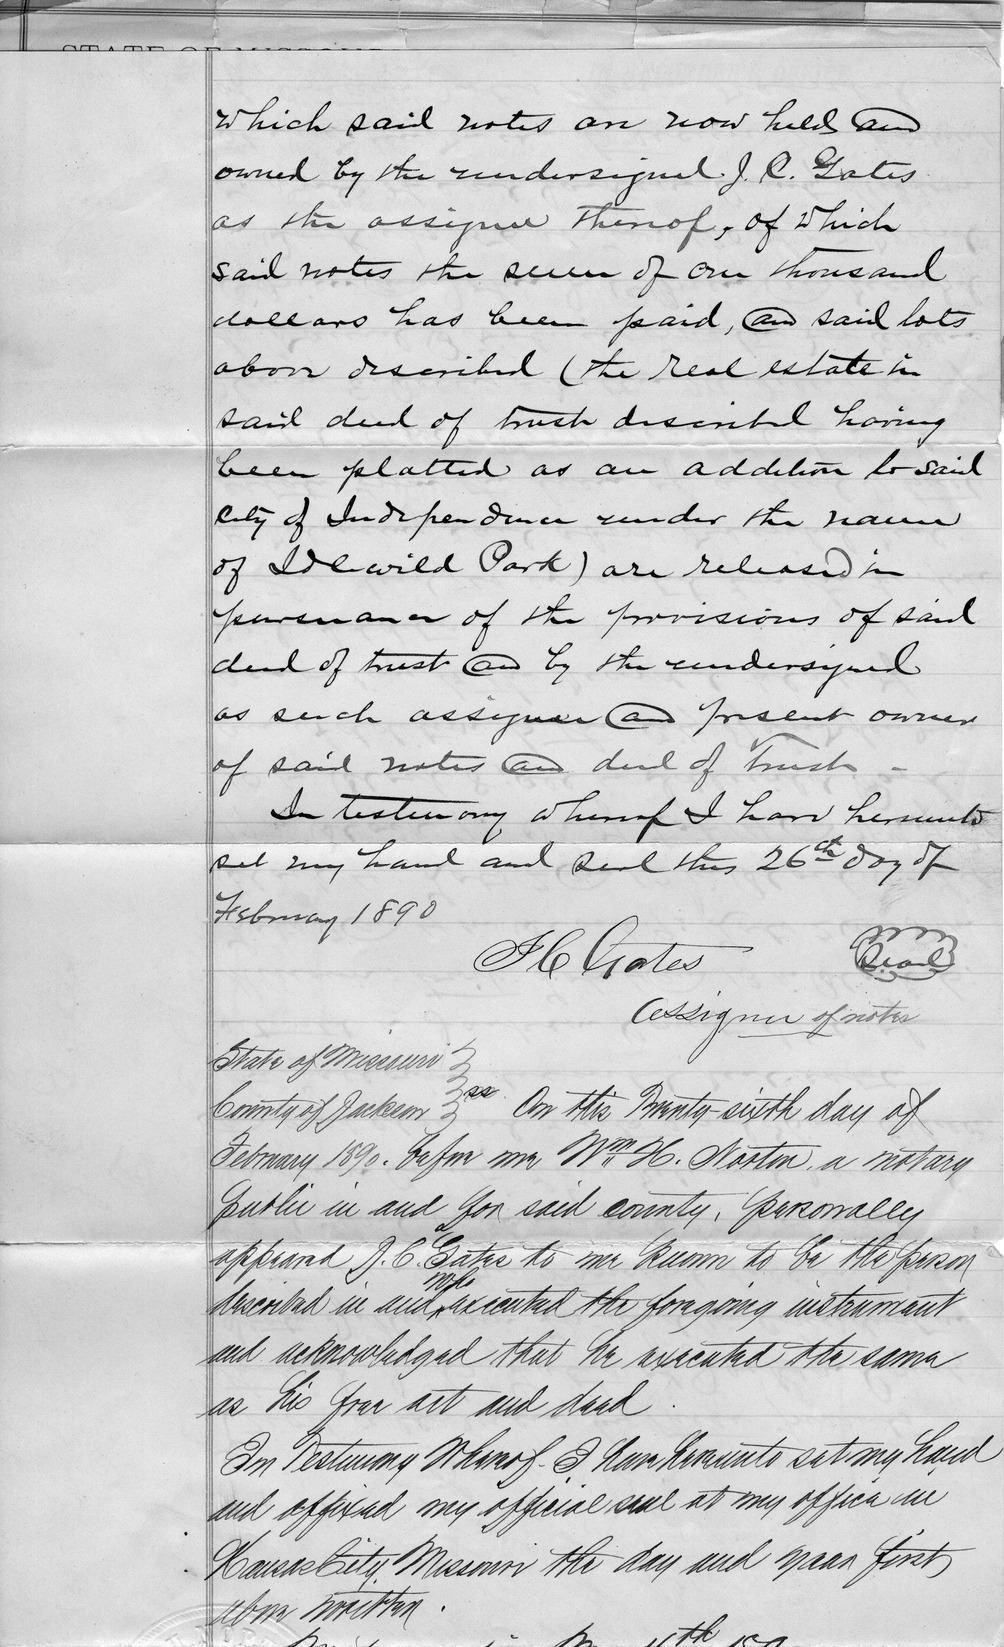 Deed of Release from J. C. Gates to Harry E. Bellis